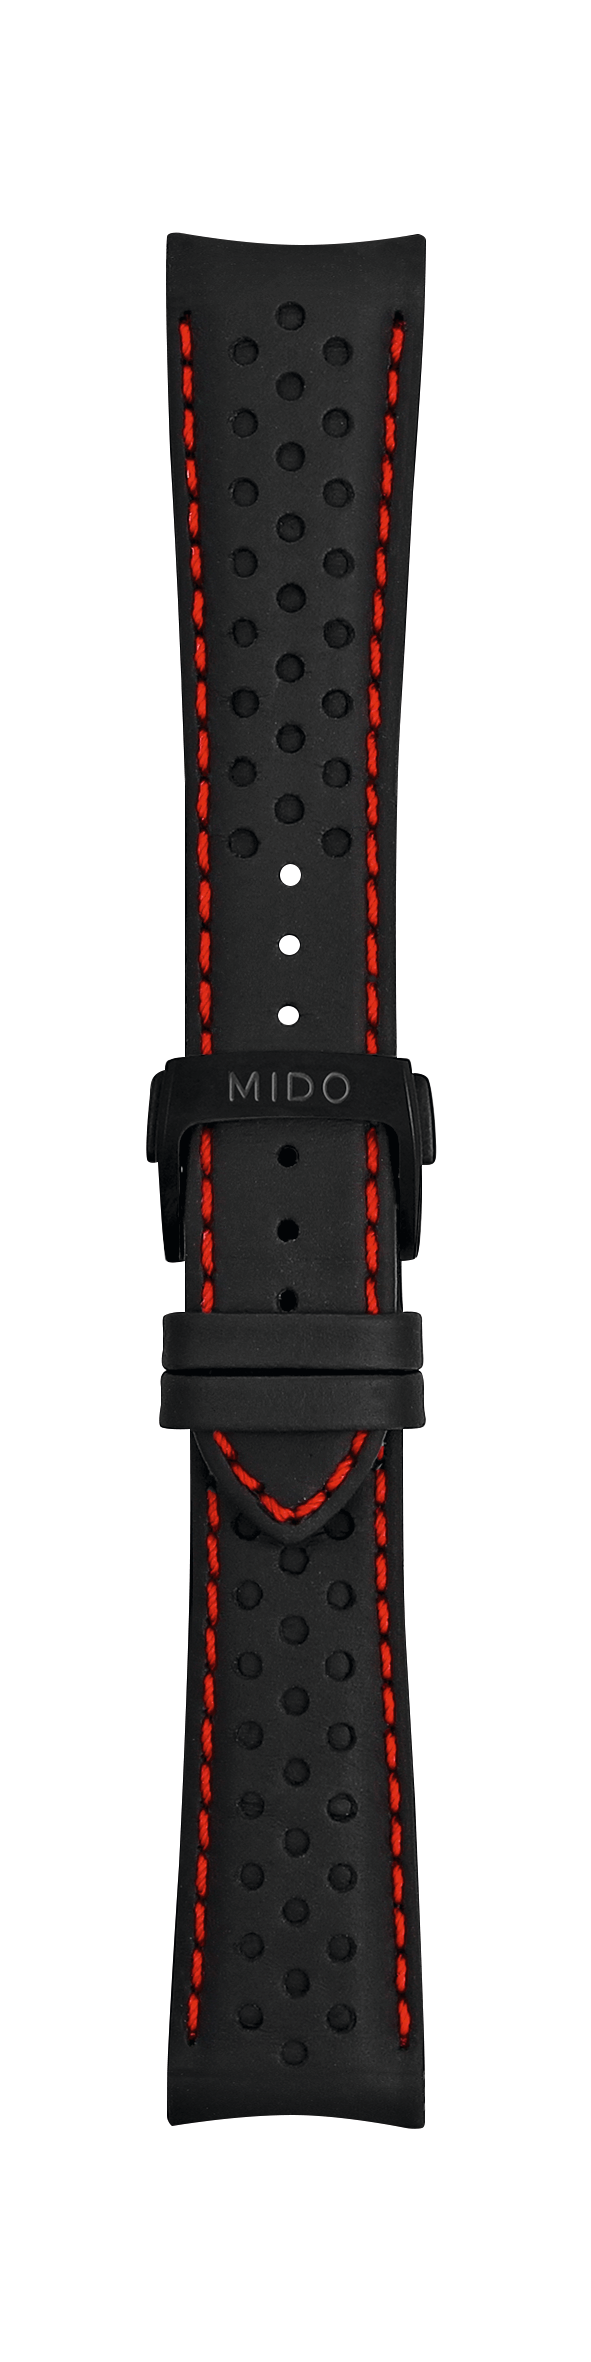 MIDO Multifort 22mm Black Leather Band Strap For Model: M025407A - WATCHBAND EXPERT